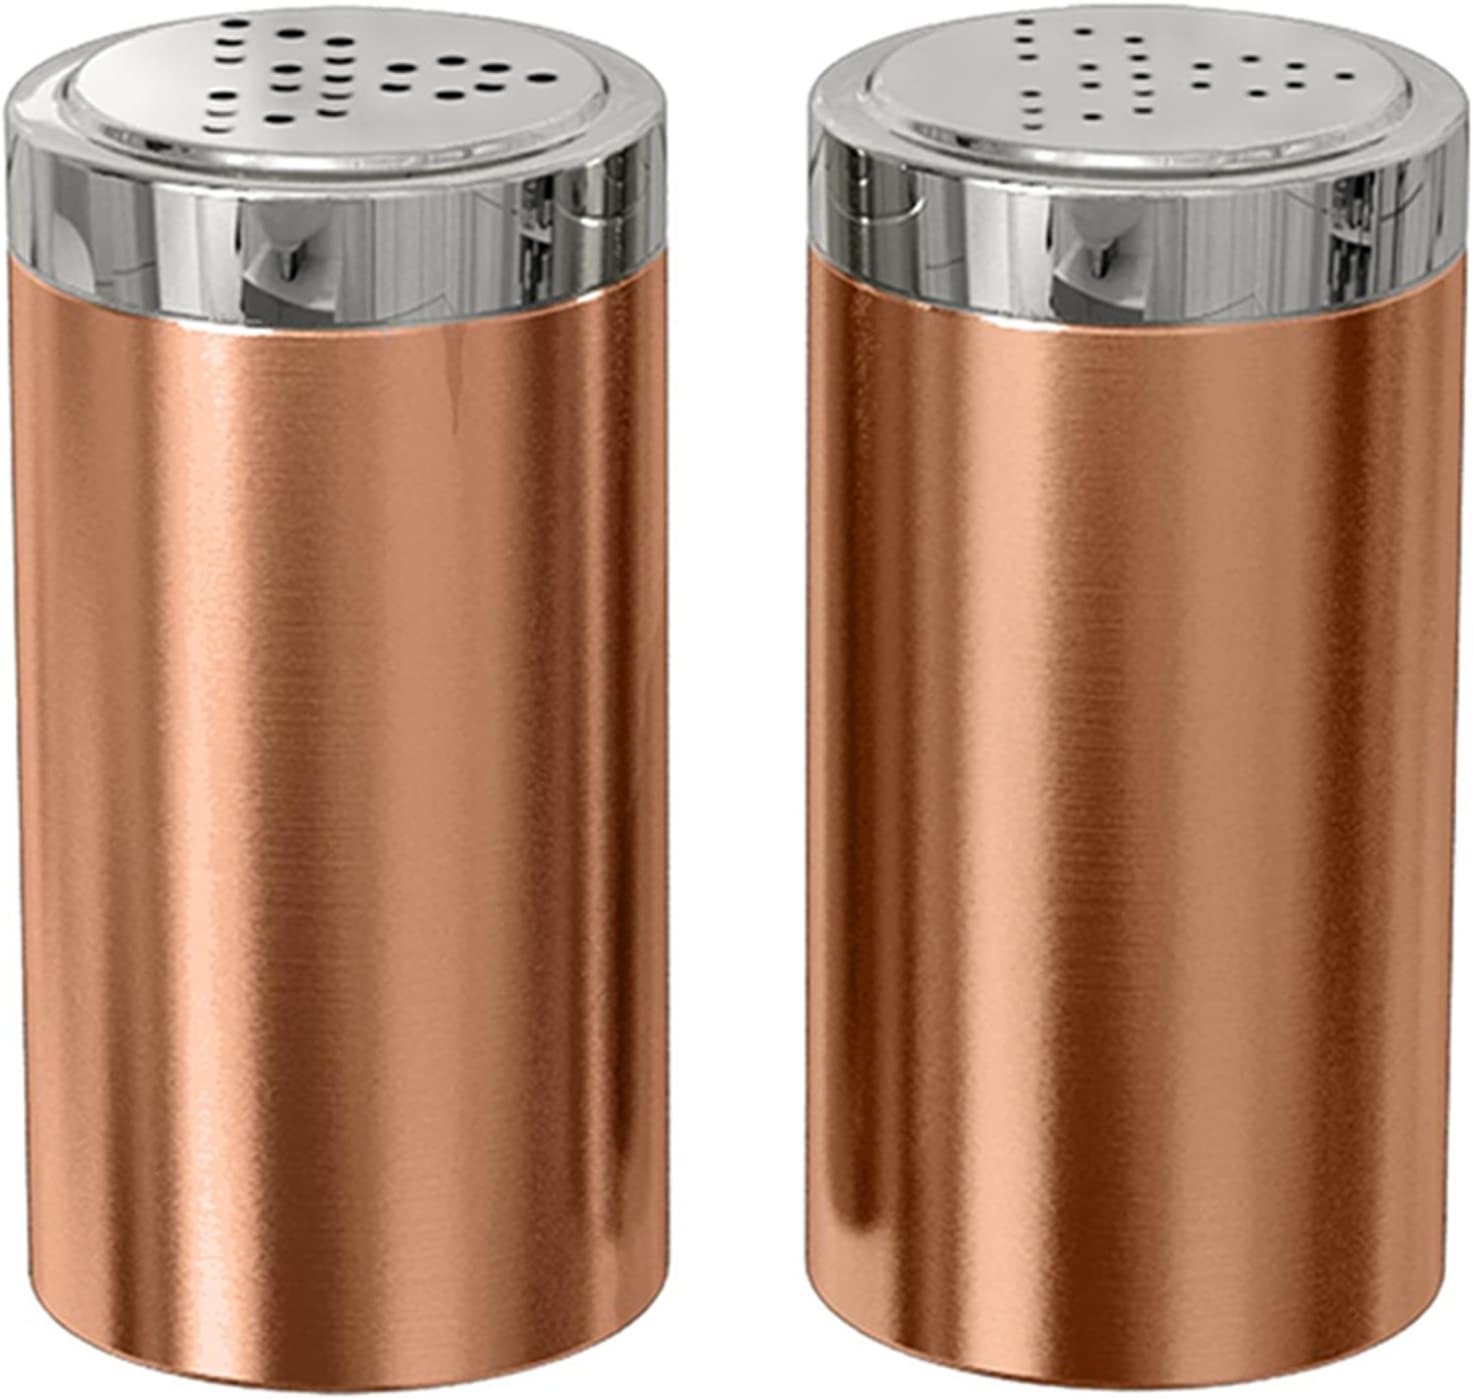 nu steel Jumbo Salt & Pepper Shaker Set of 2, 15 Oz. Stainless Steel with Copper Finish, Small, Shiny Import To Shop ×Product